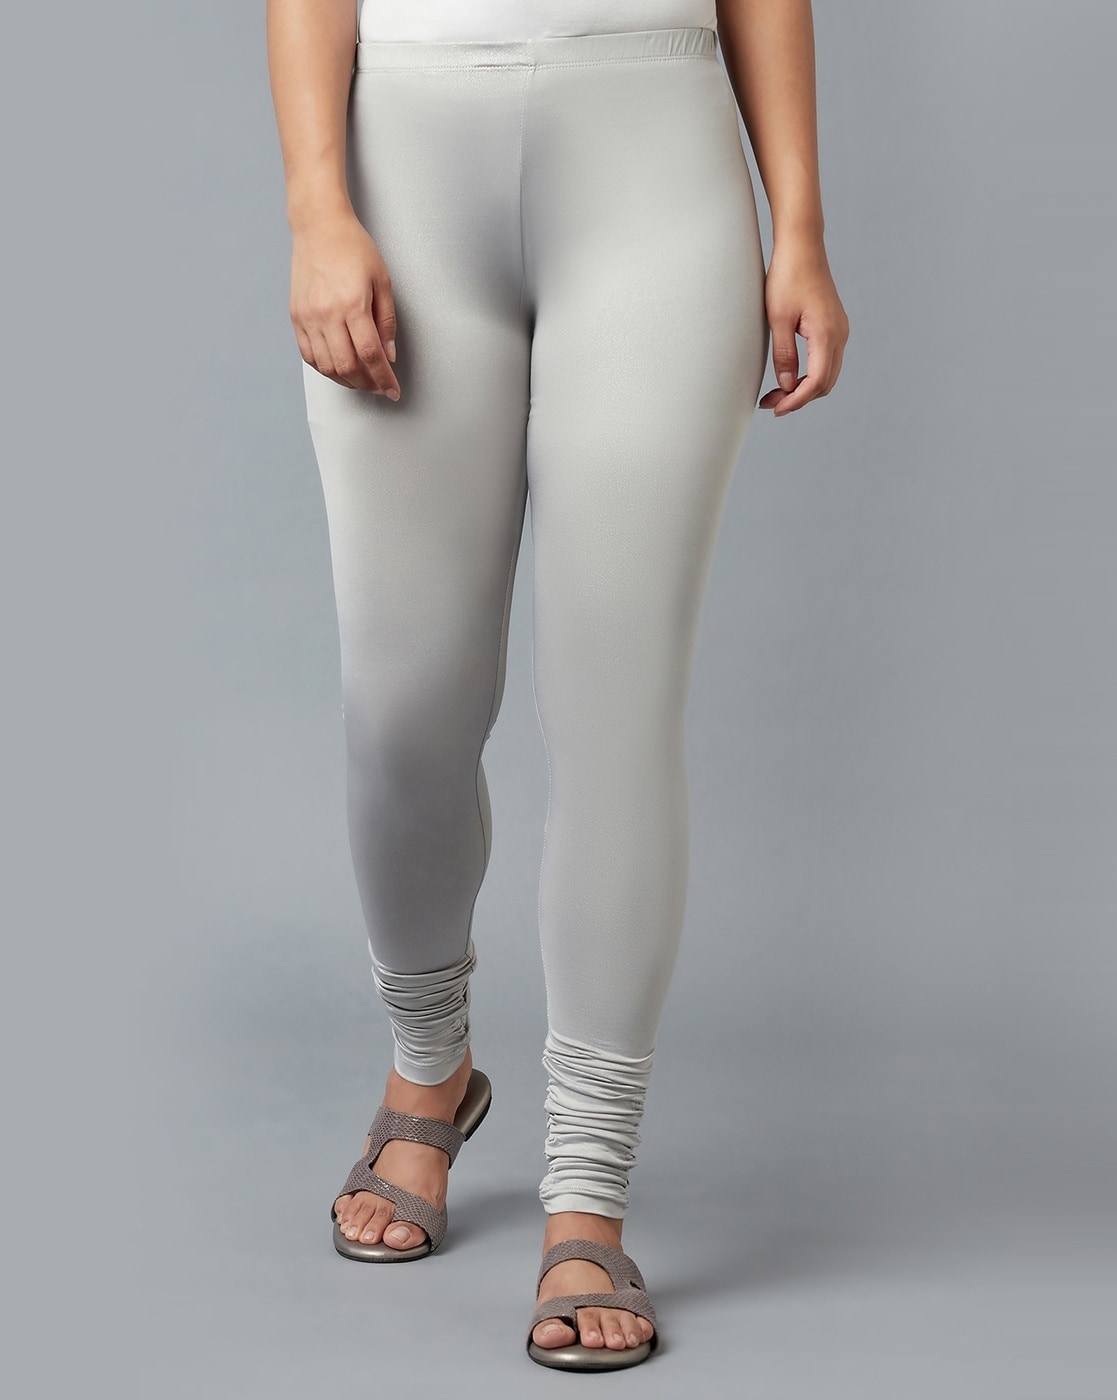 Buy online Silver Viscose Leggings from Capris & Leggings for Women by  Fashion Monster for ₹369 at 72% off